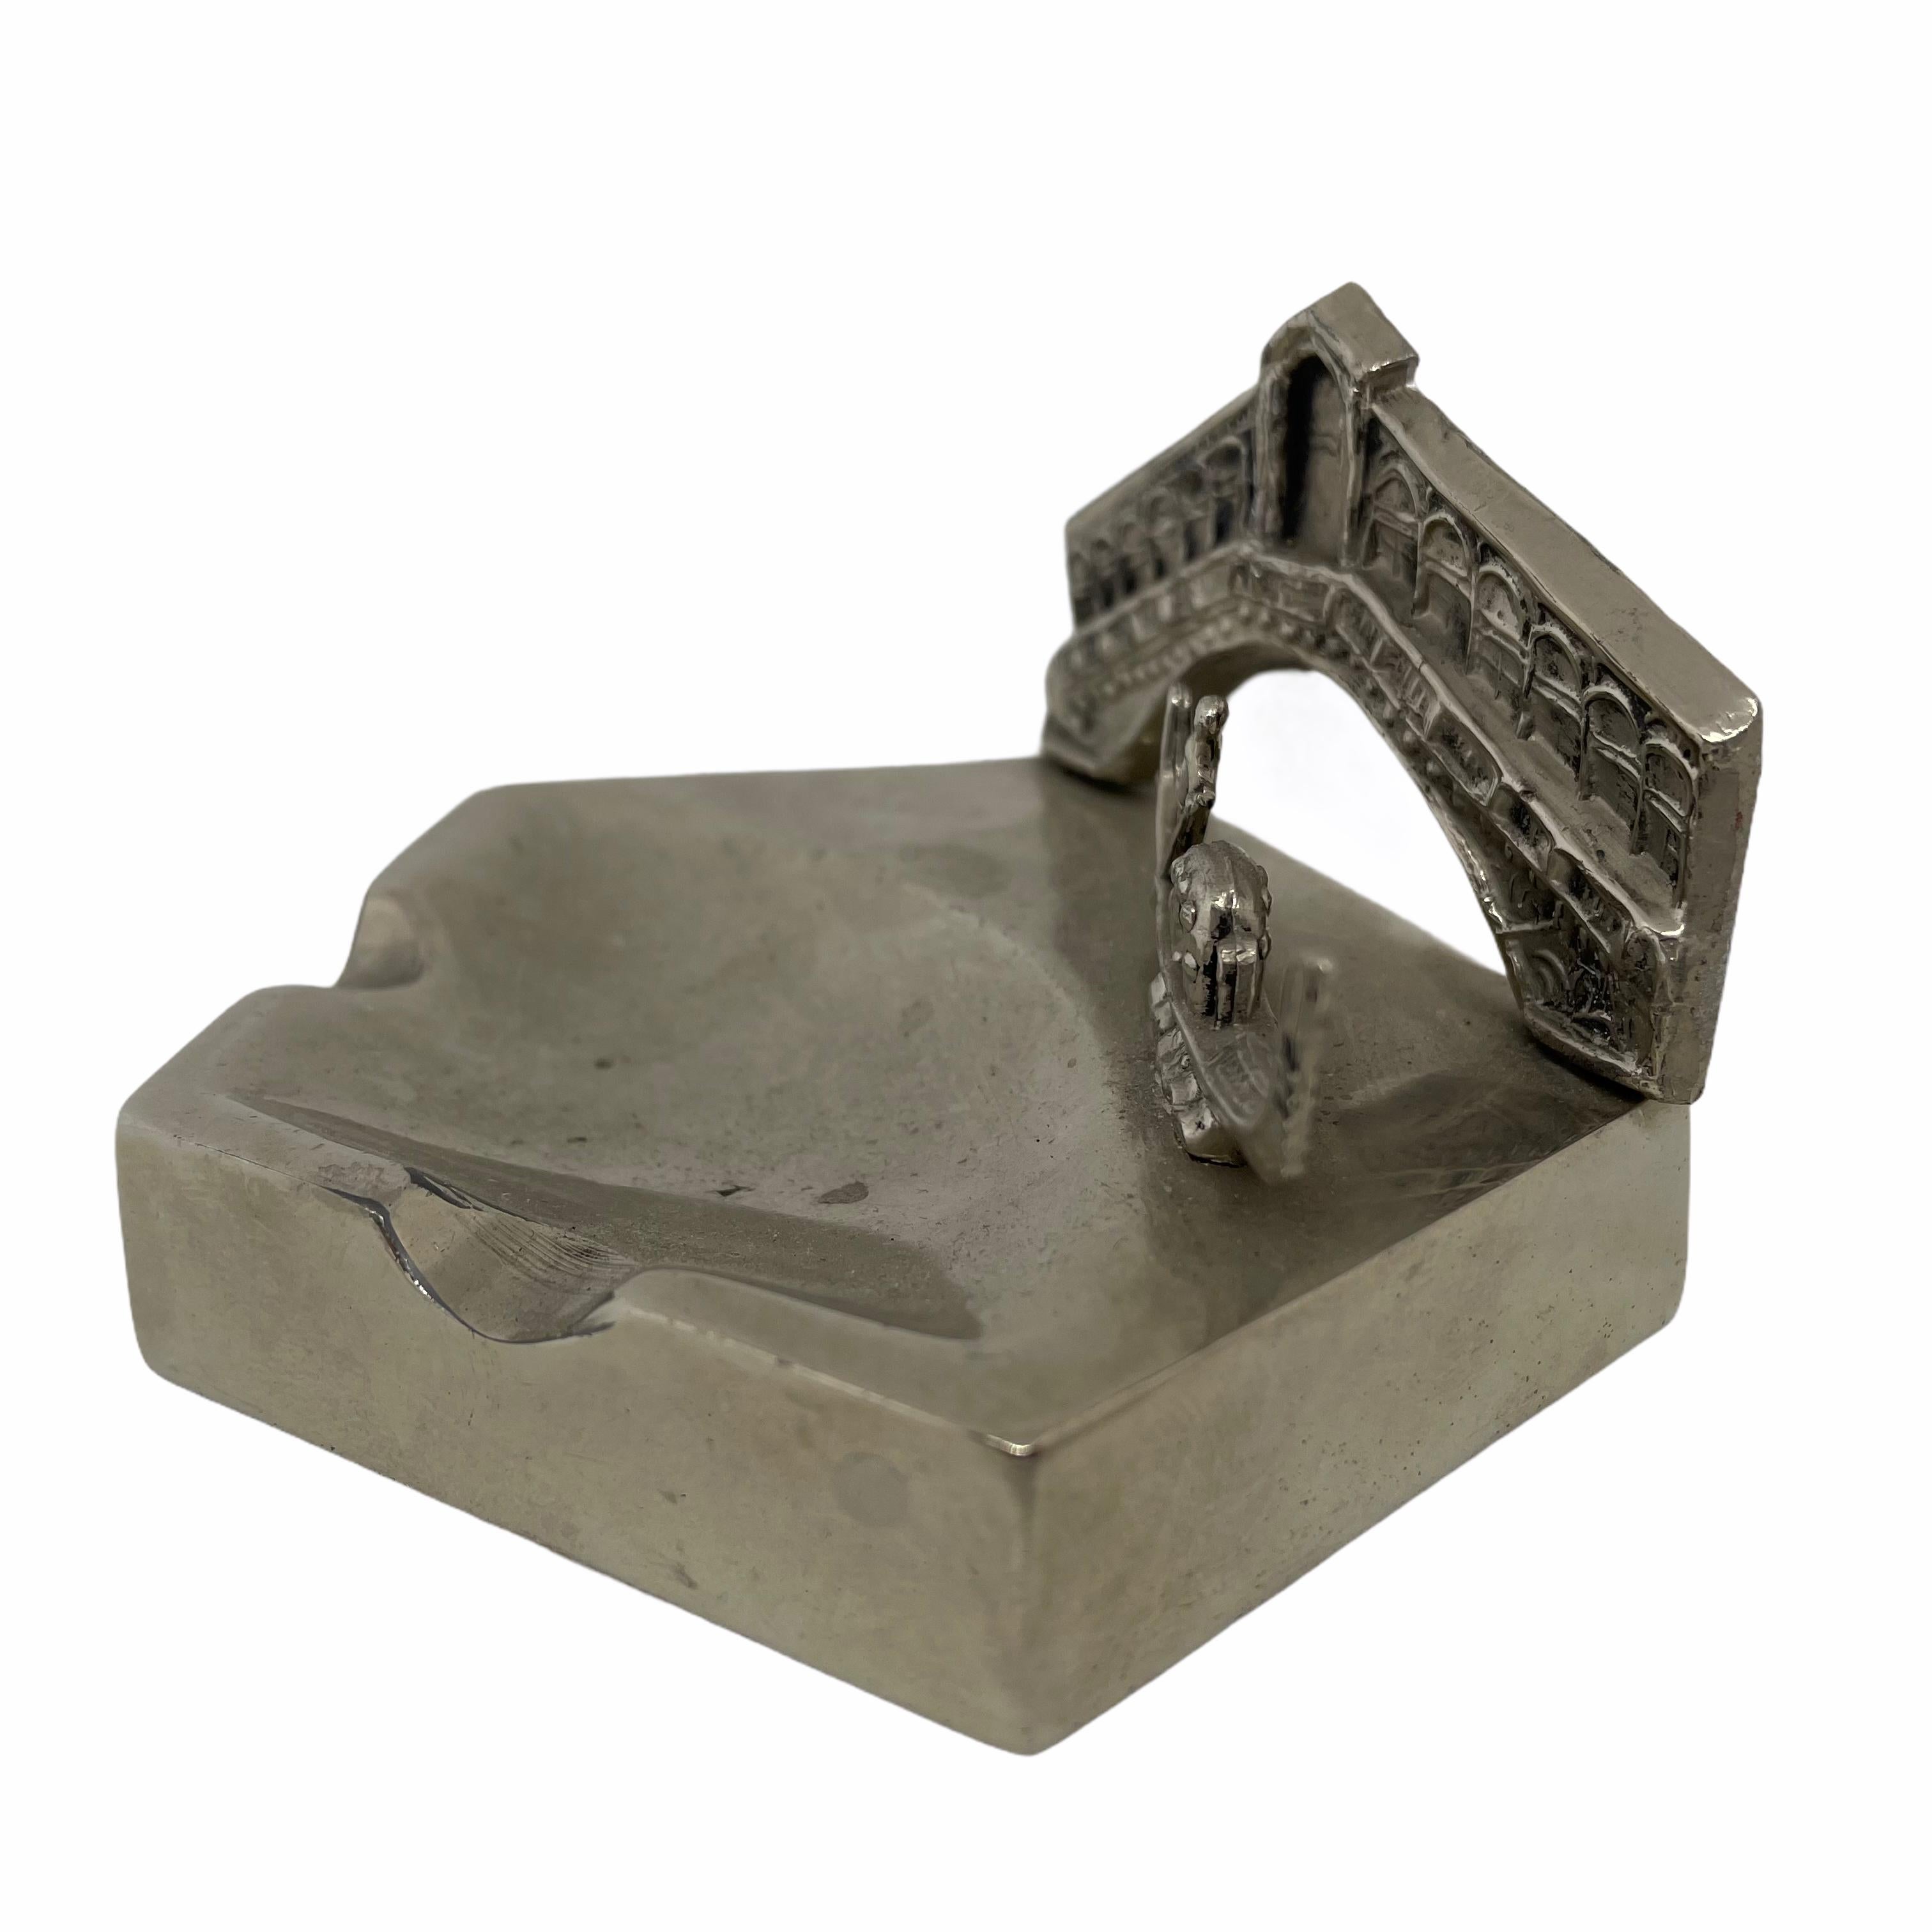 A 1950s souvenir building architectural model ashtray. Some wear with a nice patina, but this is old-age. Made of metal. A beautiful nice item to use or just a display item in your collections of souvenirs from around the world.

 